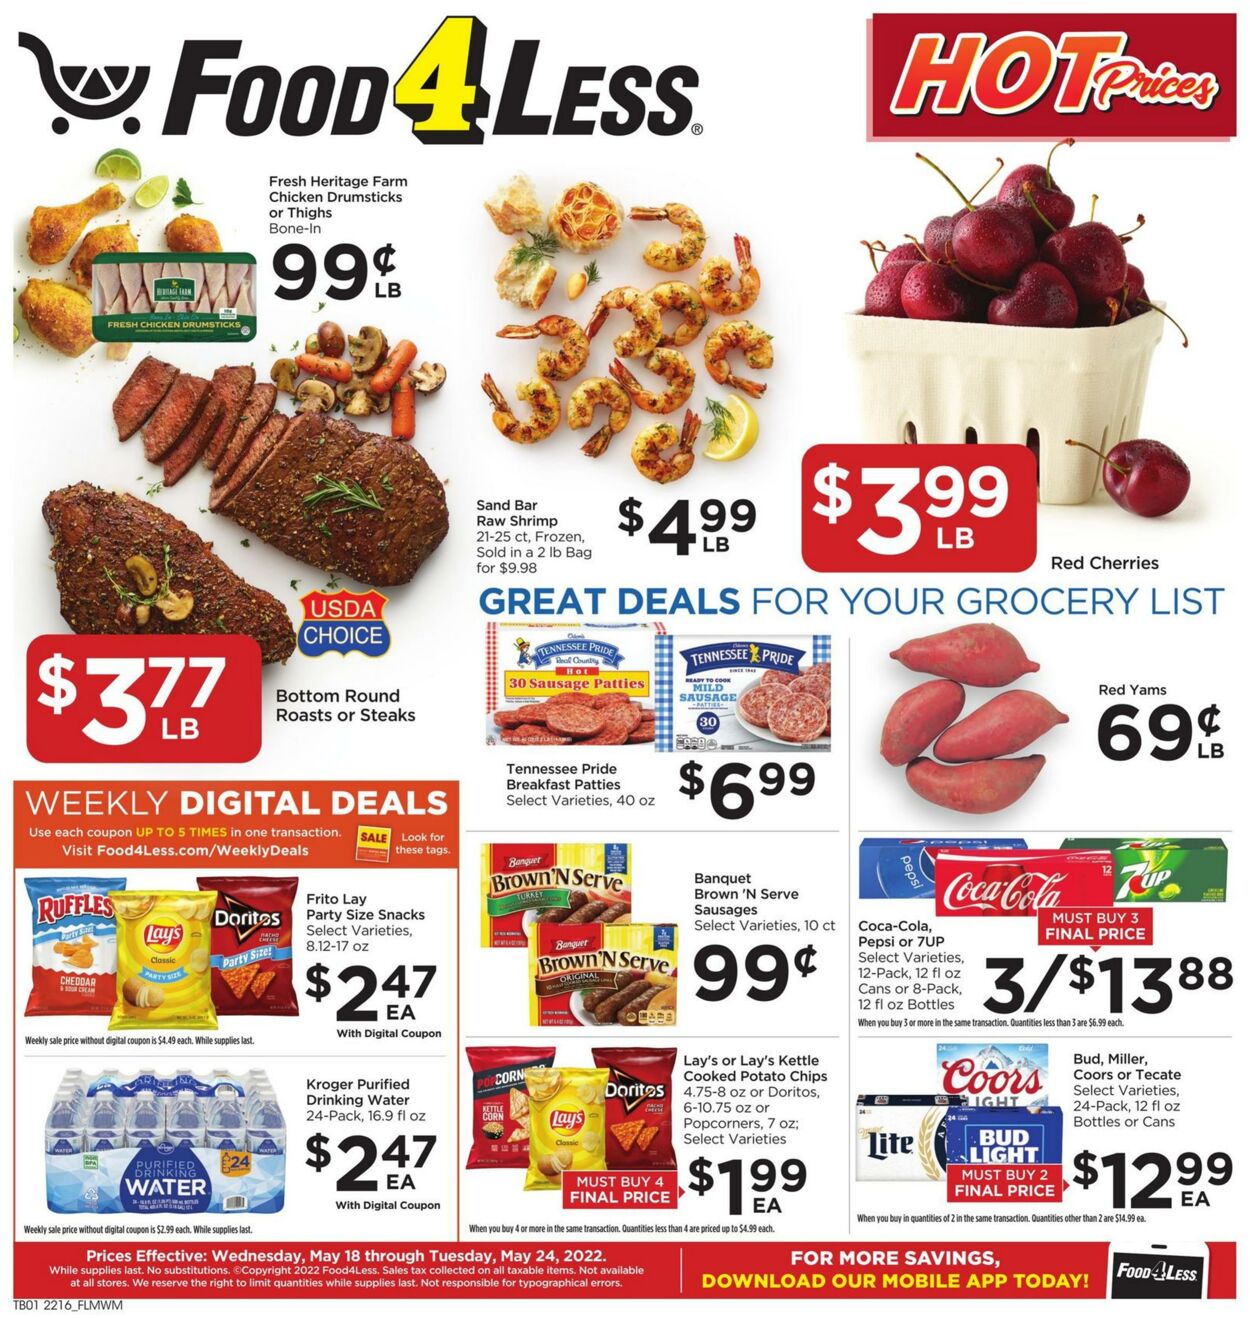 Food 4 less Promotional weekly ads